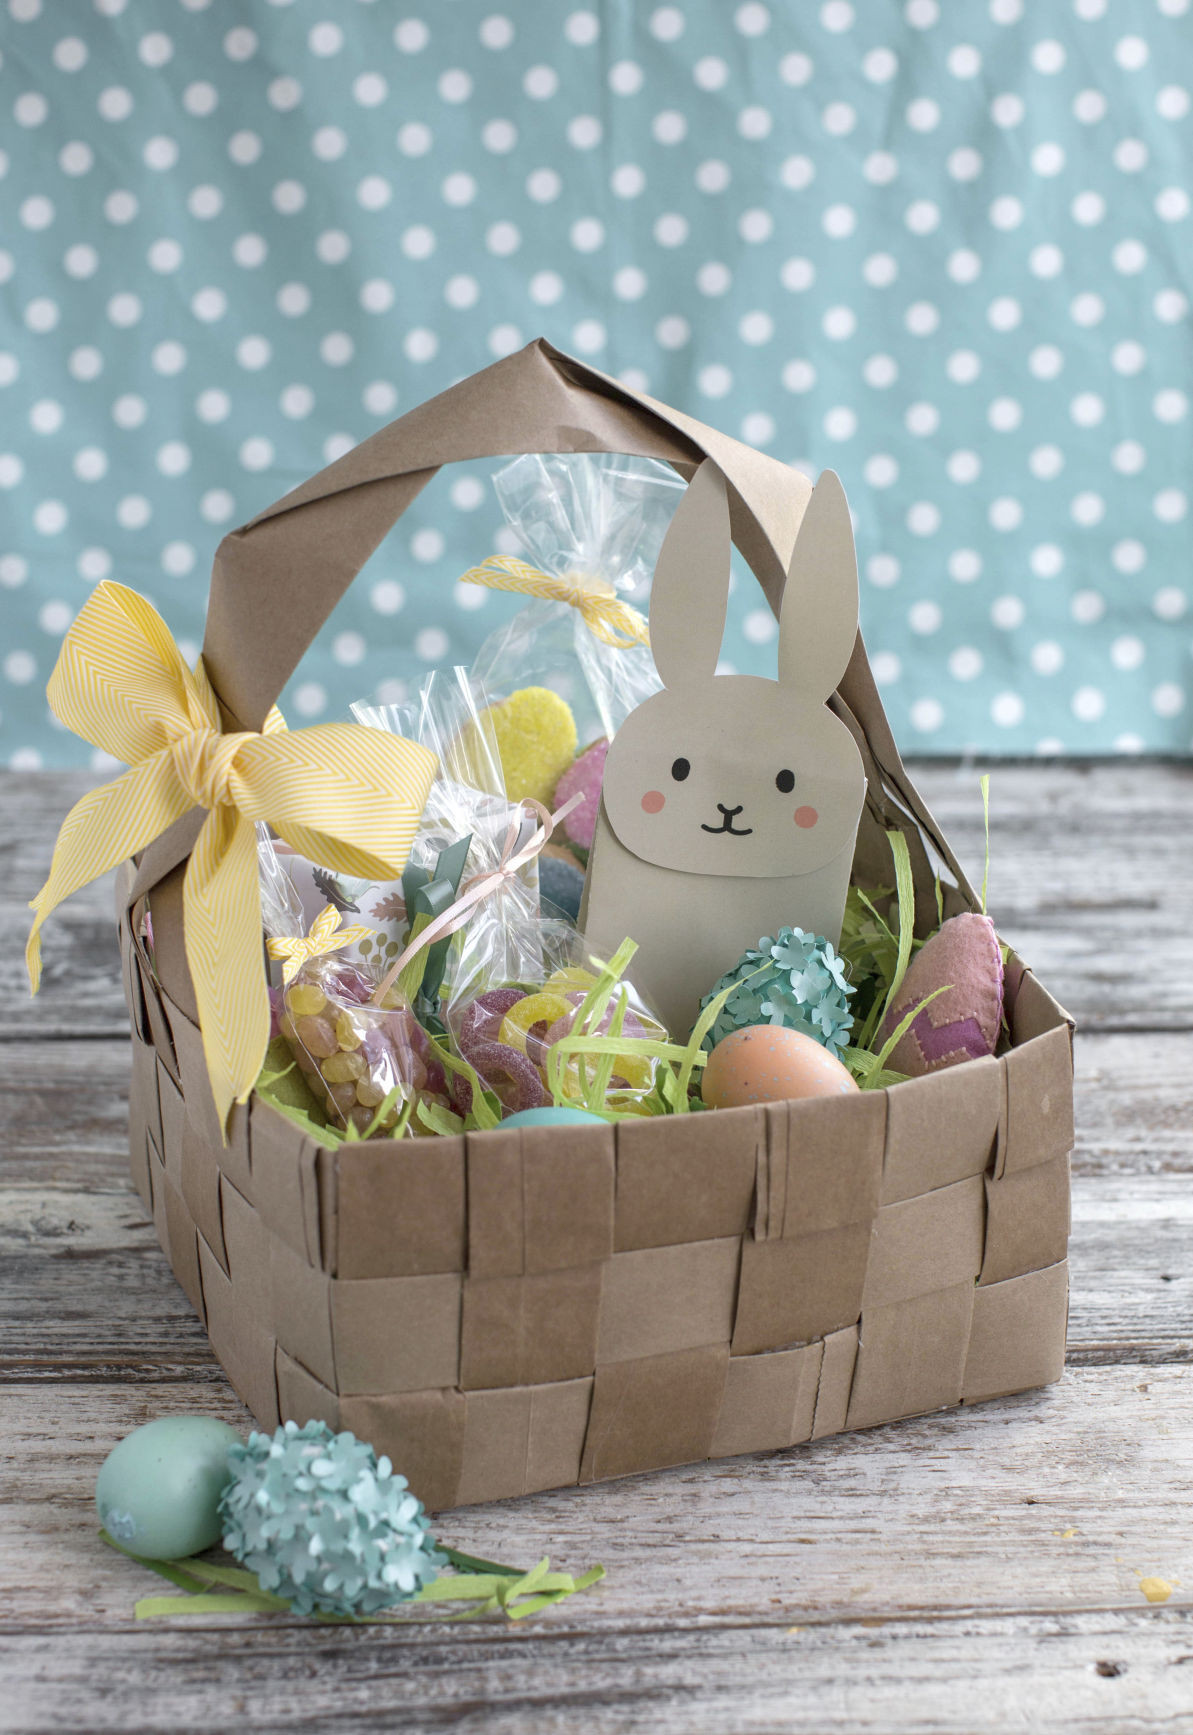 Diy Easter Basket
 Hop to it 5 ways to creative with Easter baskets